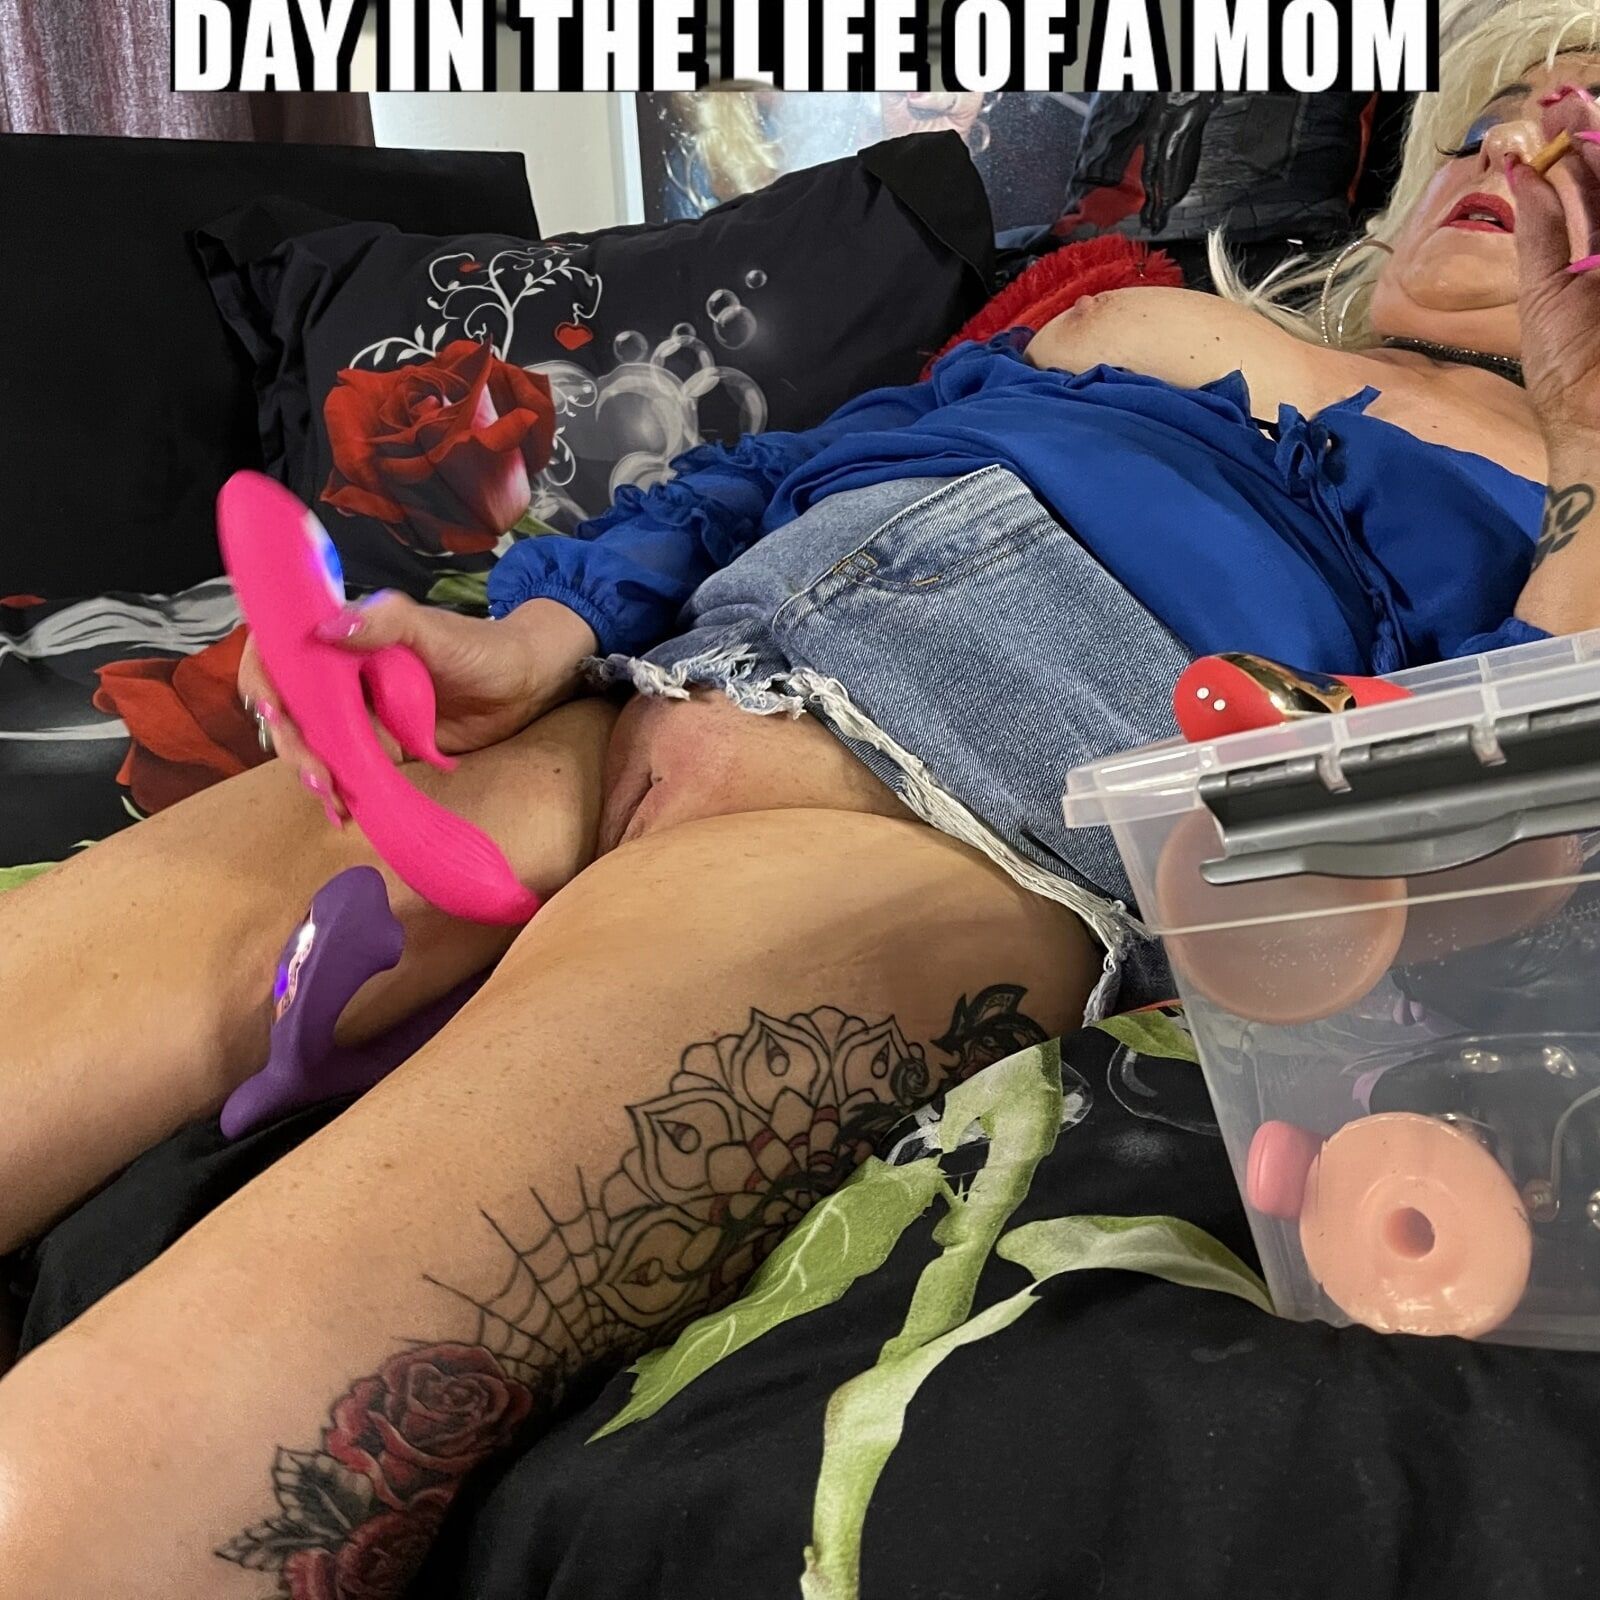 SHIRLEY THE LIFE OF A MOM #31